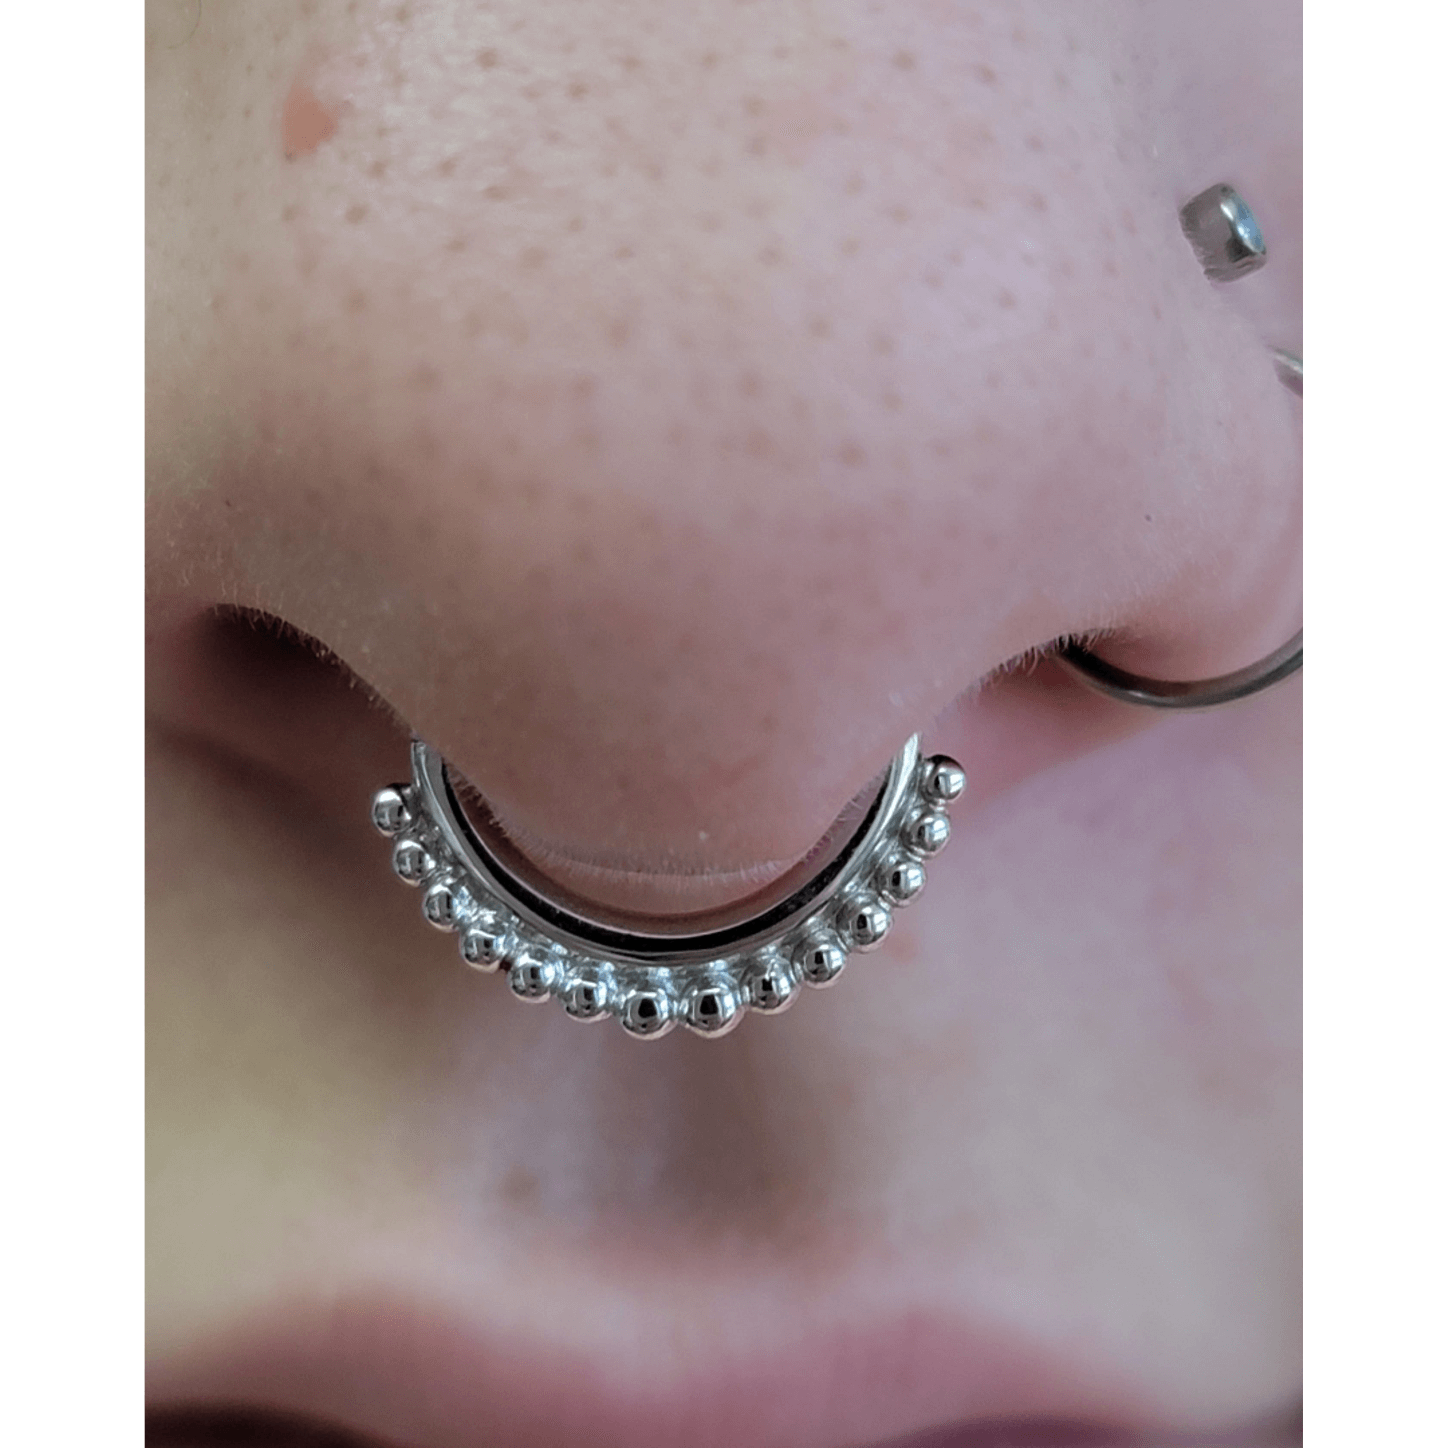 Septum piercing done with solid 14k white gold